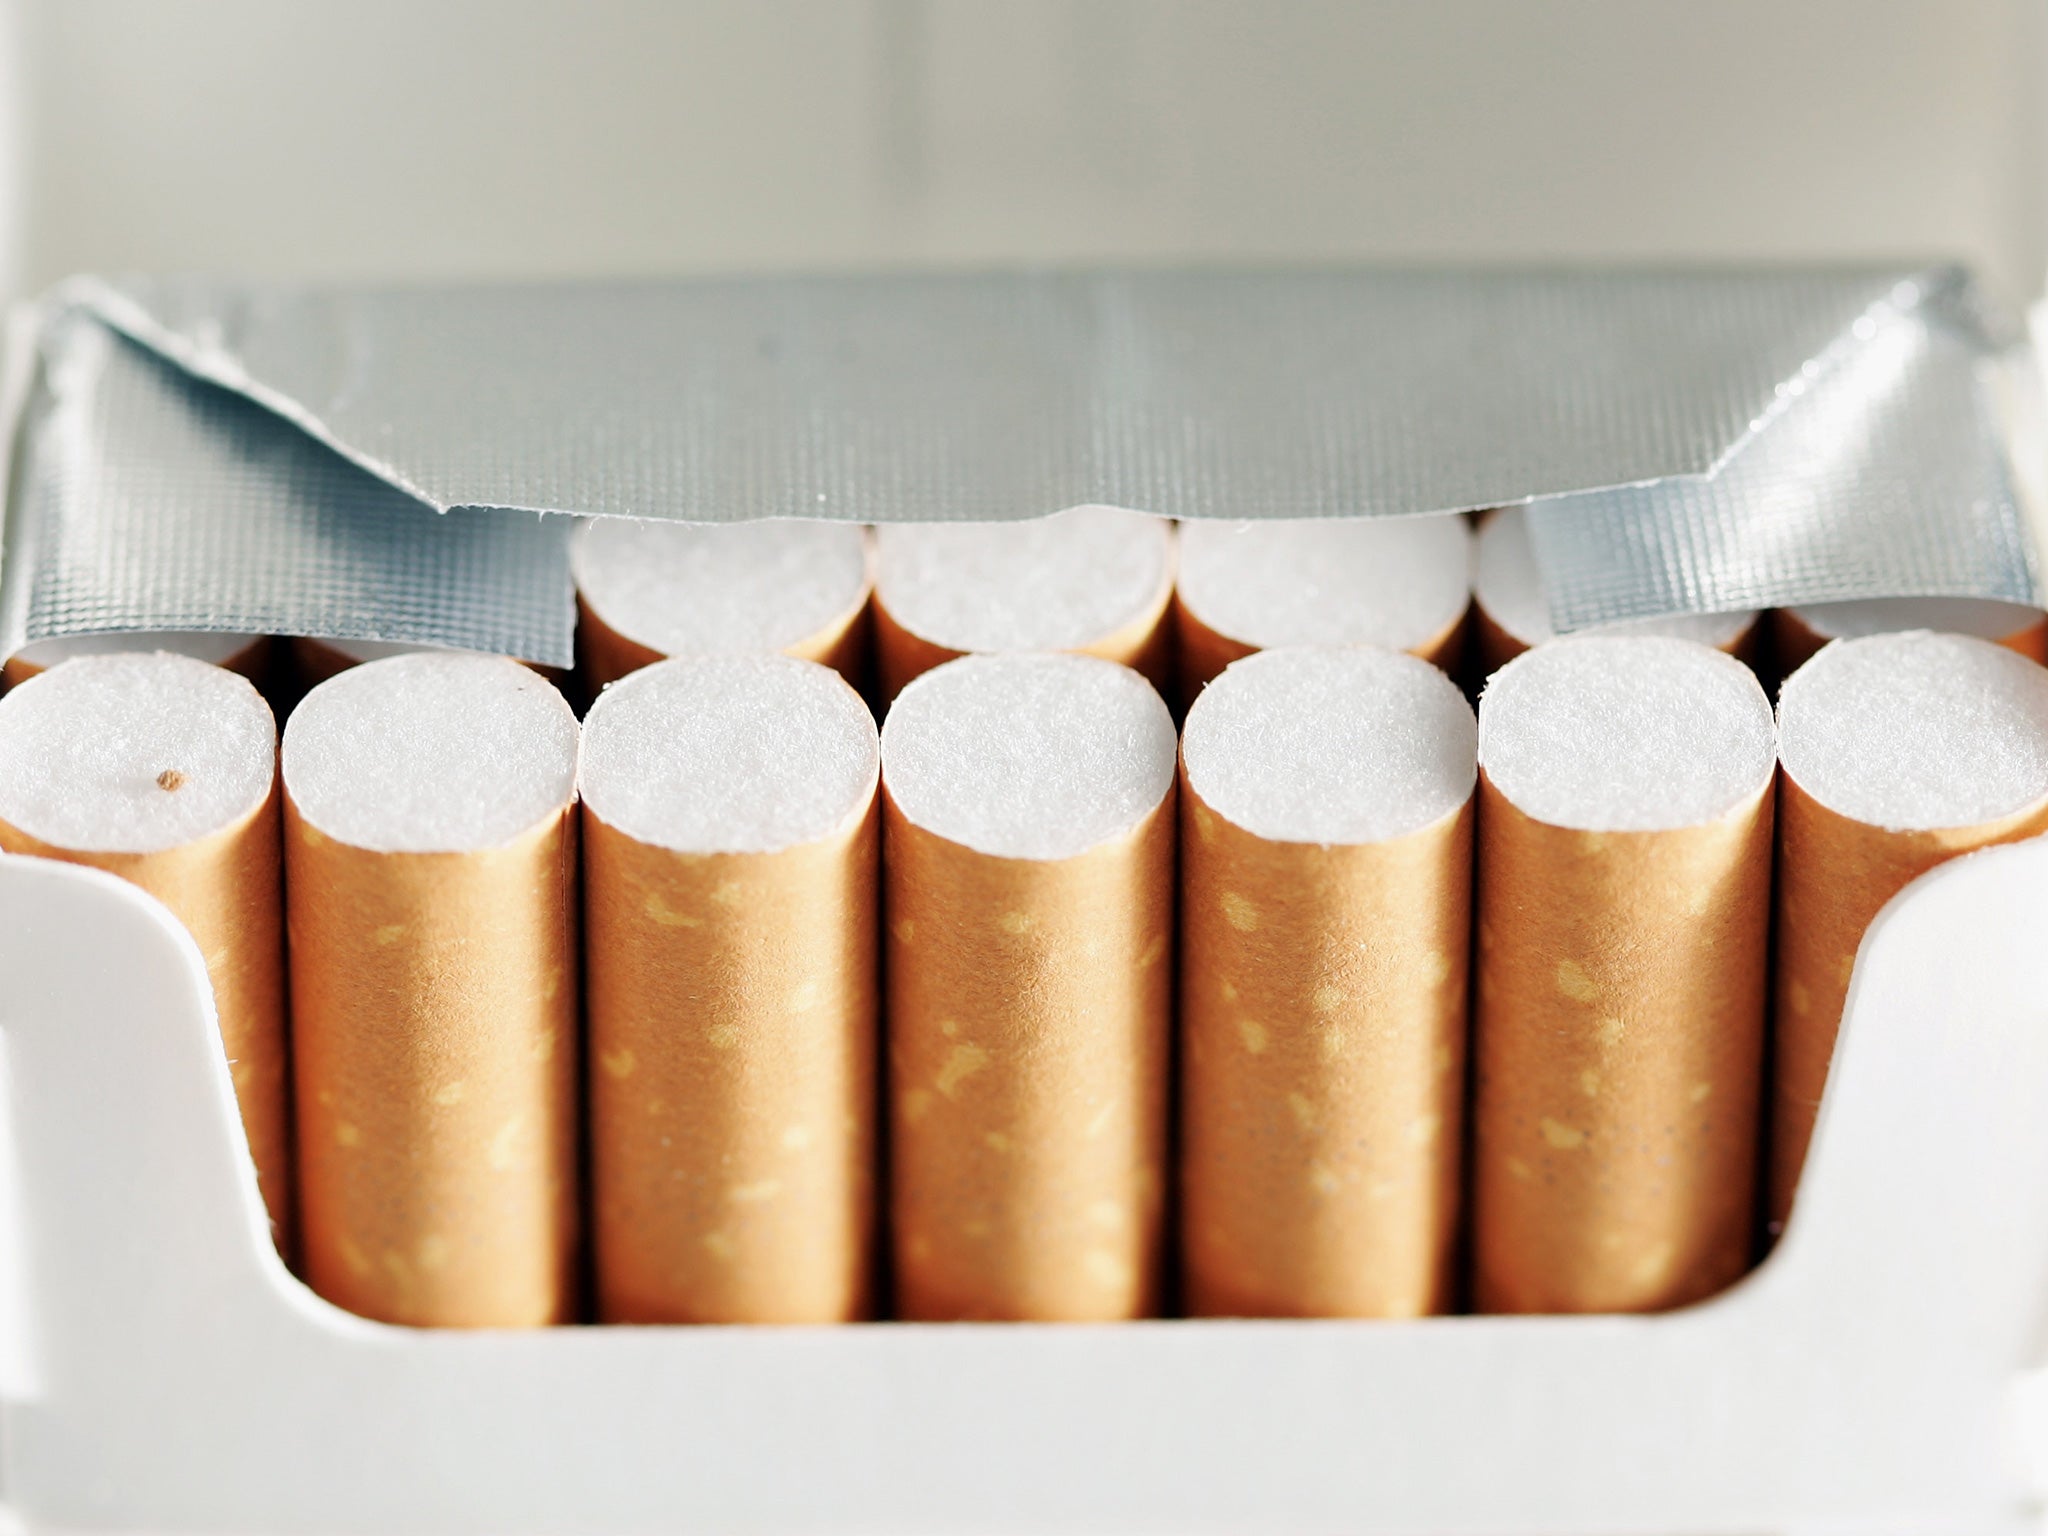 How tobacco firms flout UK law on plain packaging, Smoking